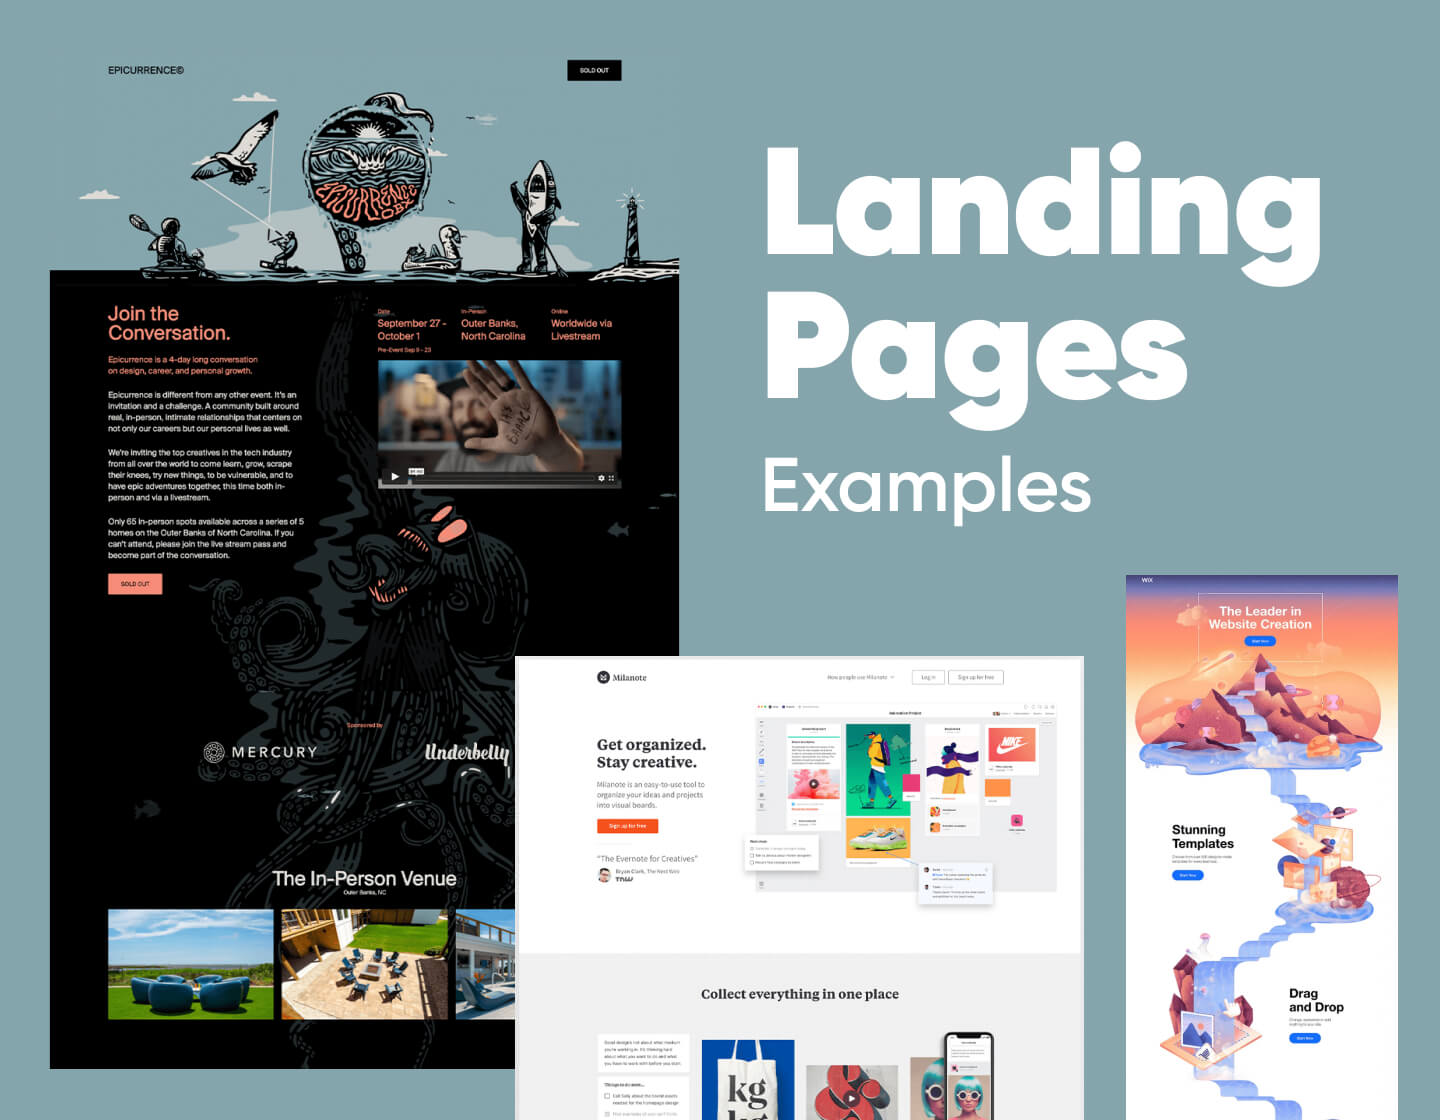 14 Examples of Landing Pages that Drive High Conversions